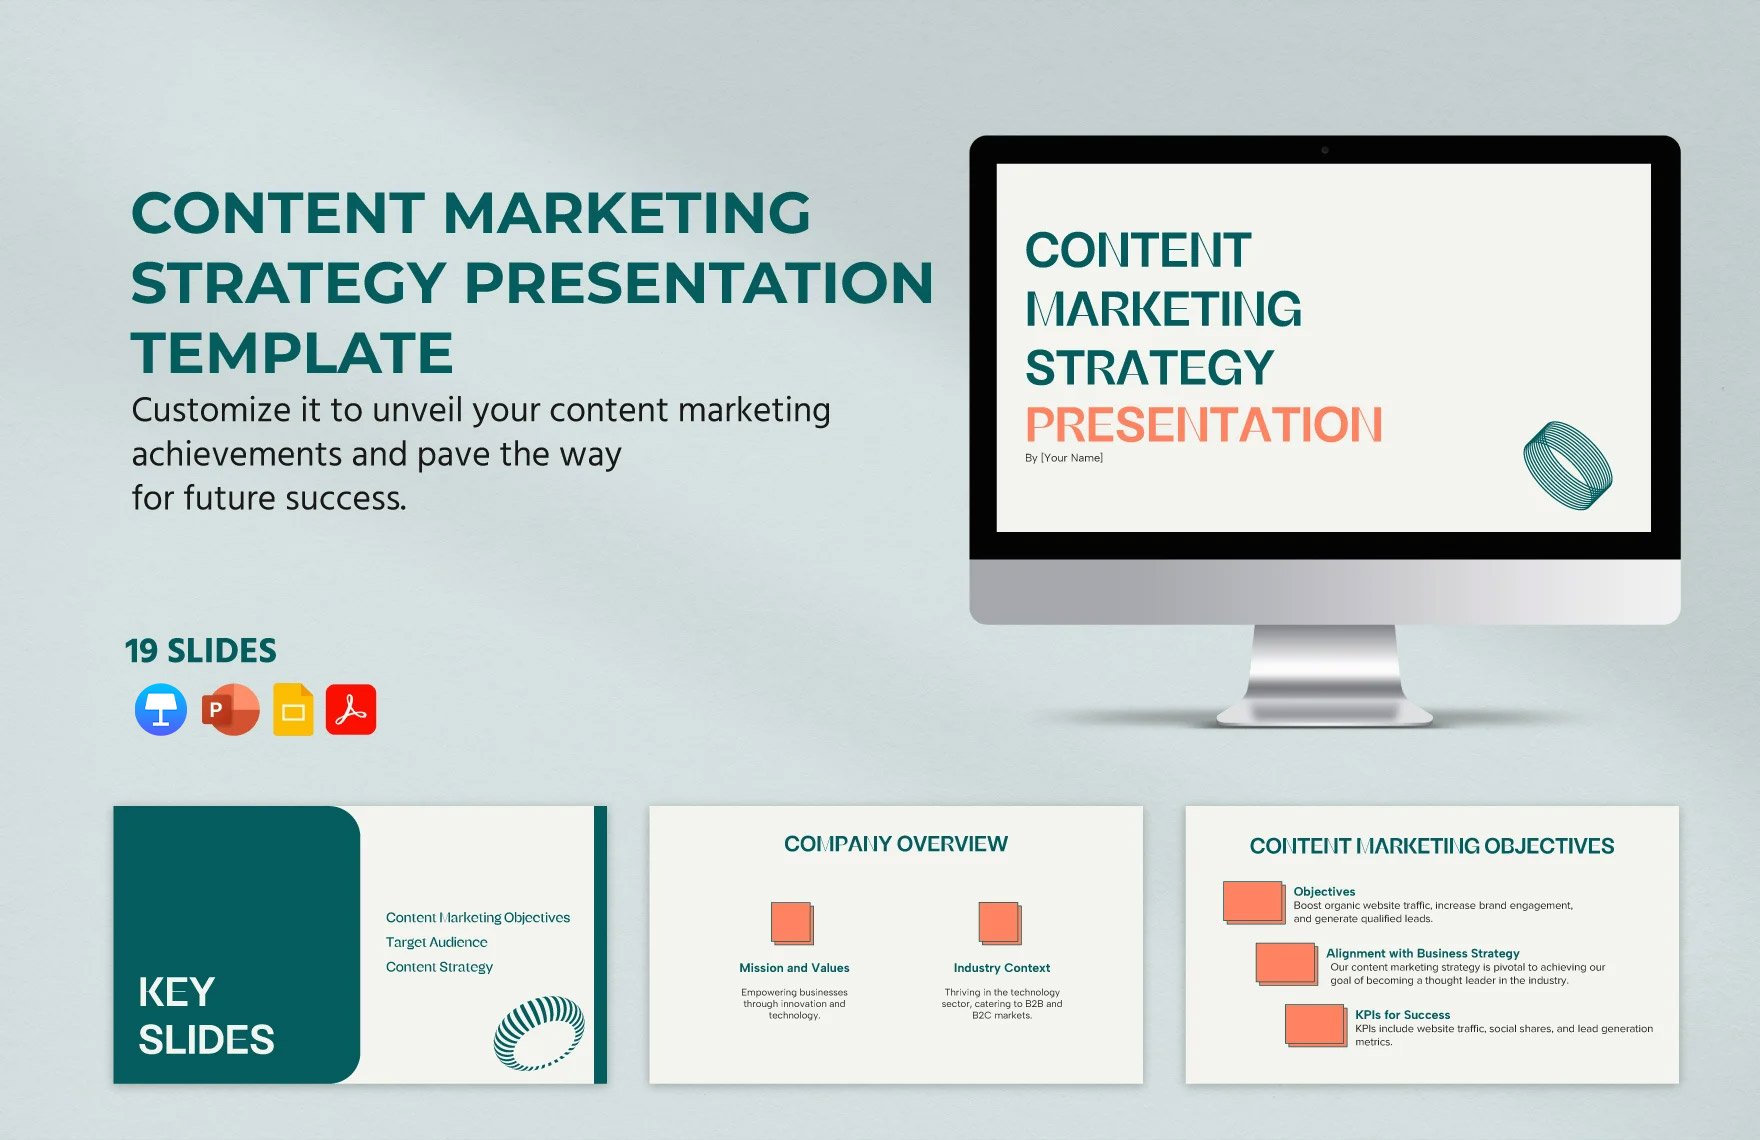 Content Marketing Strategy Presentation Template